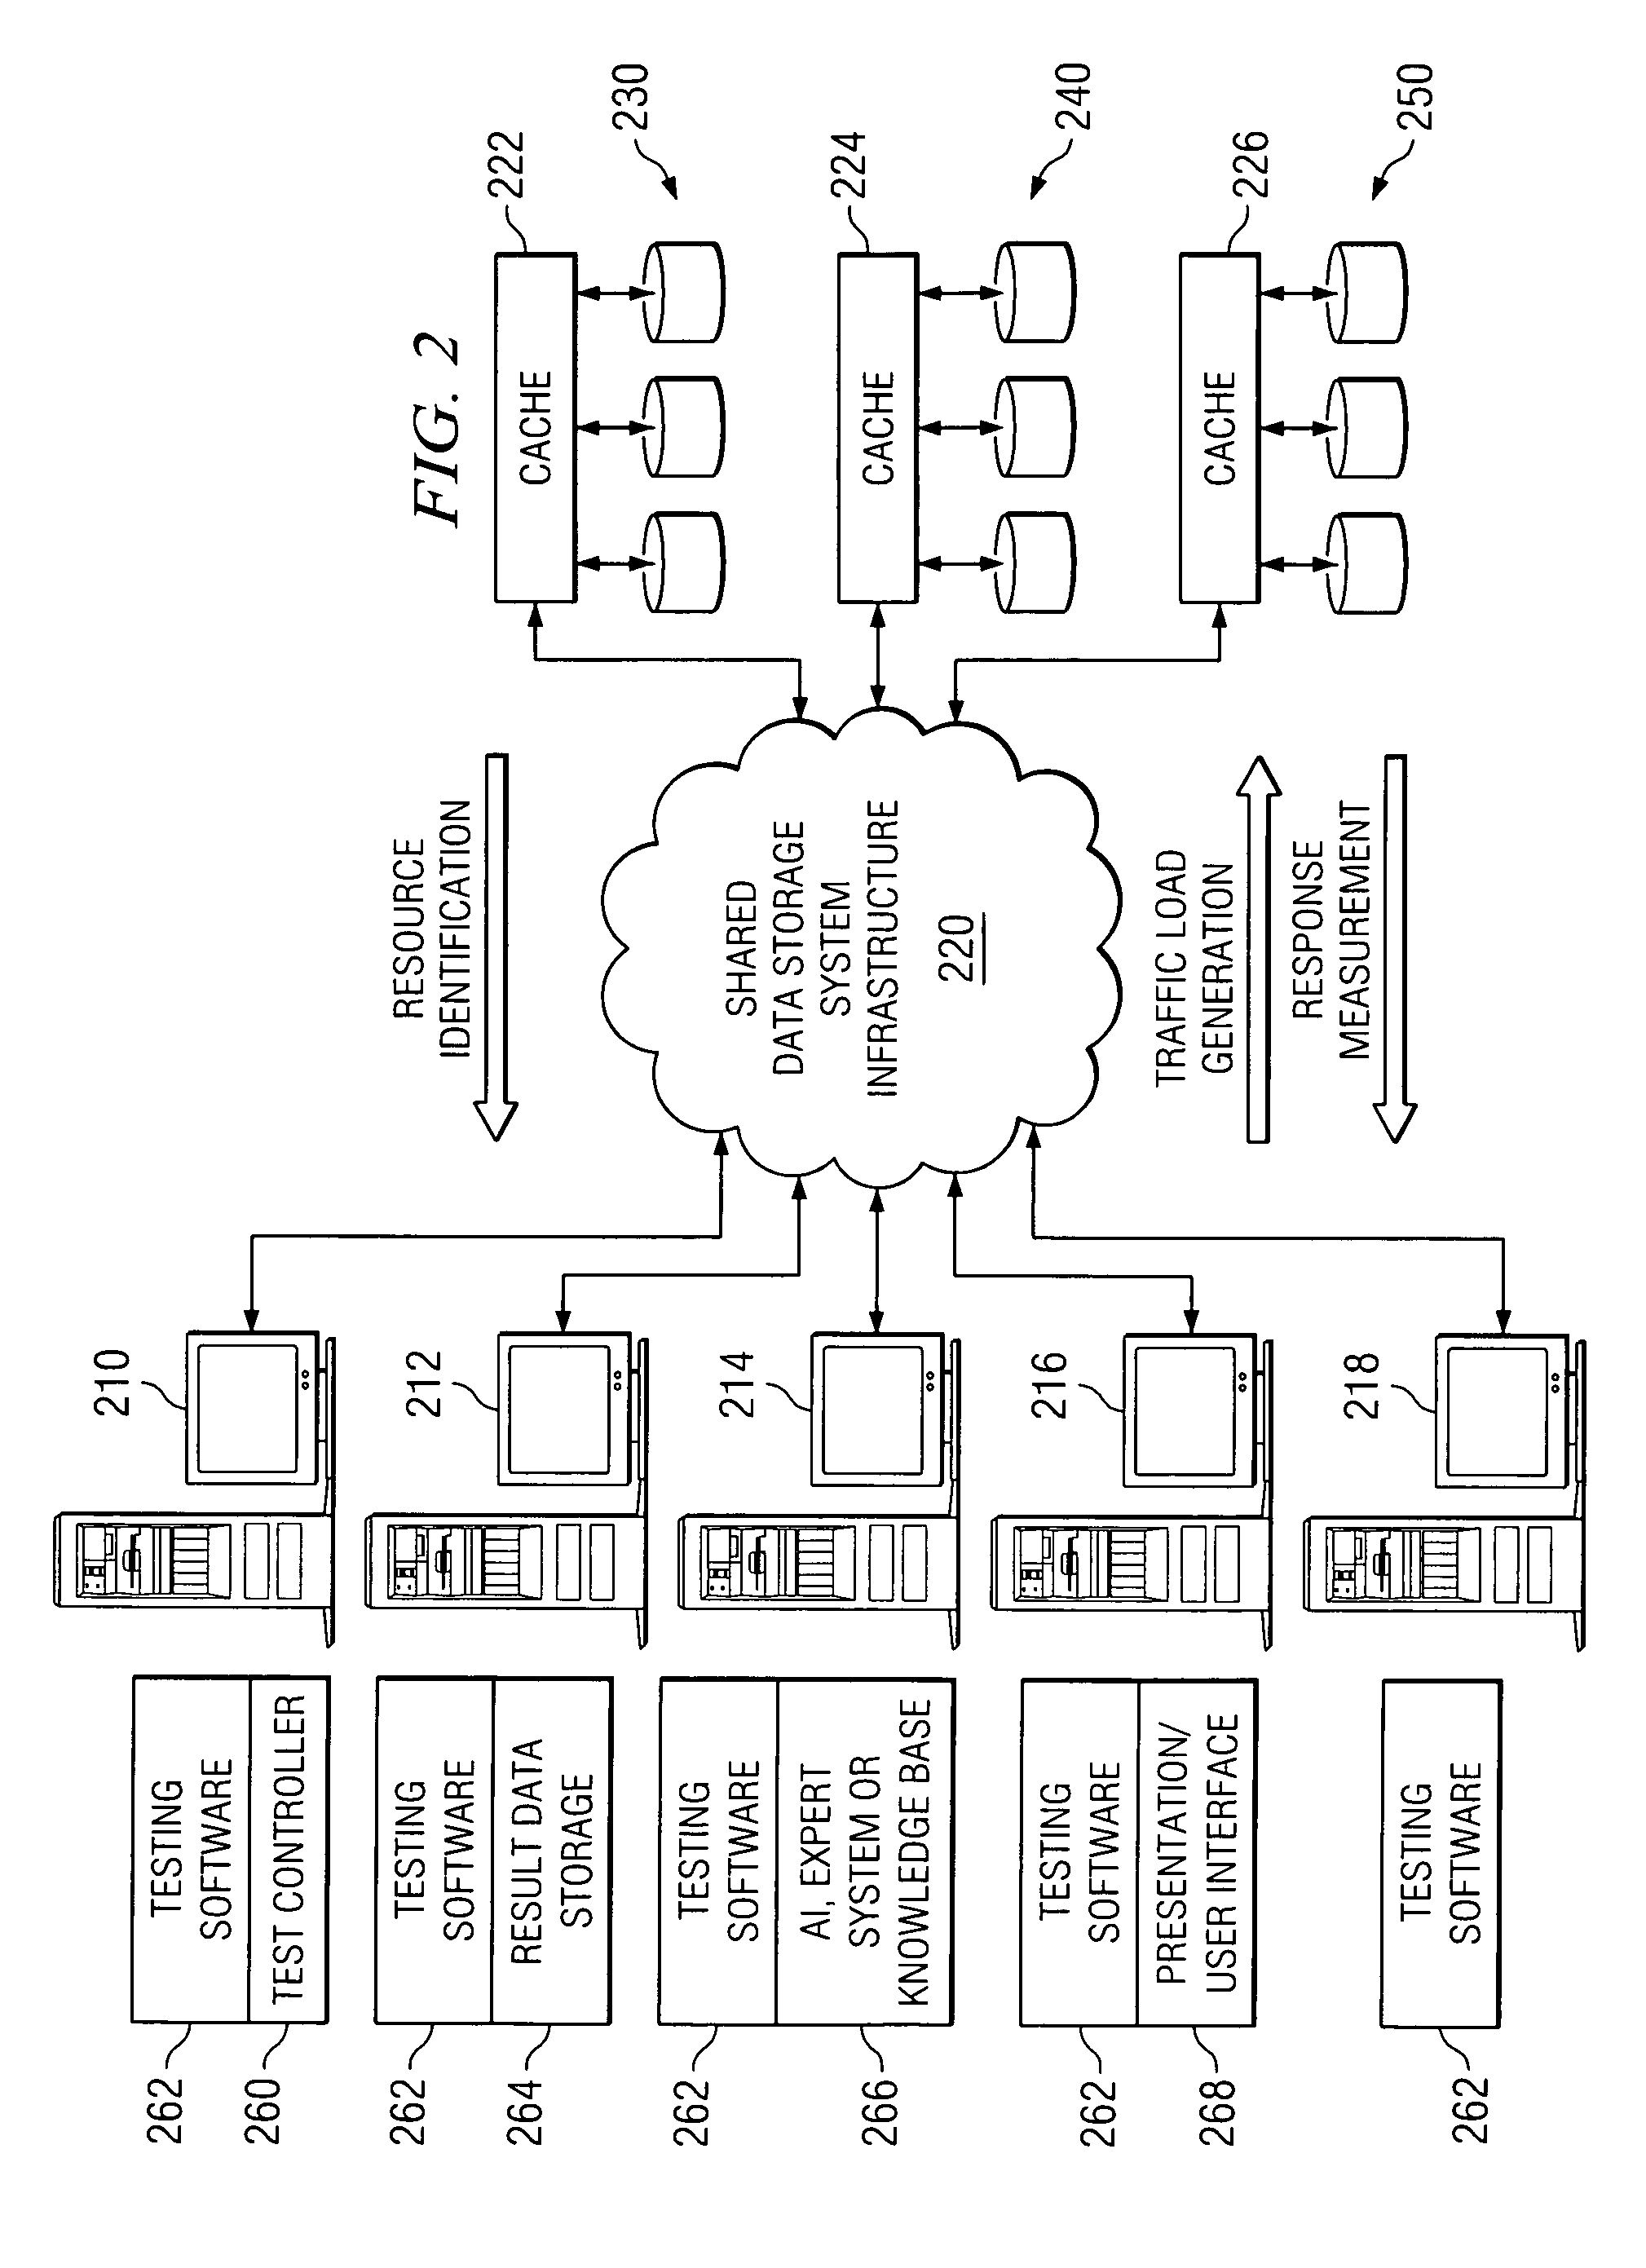 System and method for path saturation for computer storage performance analysis